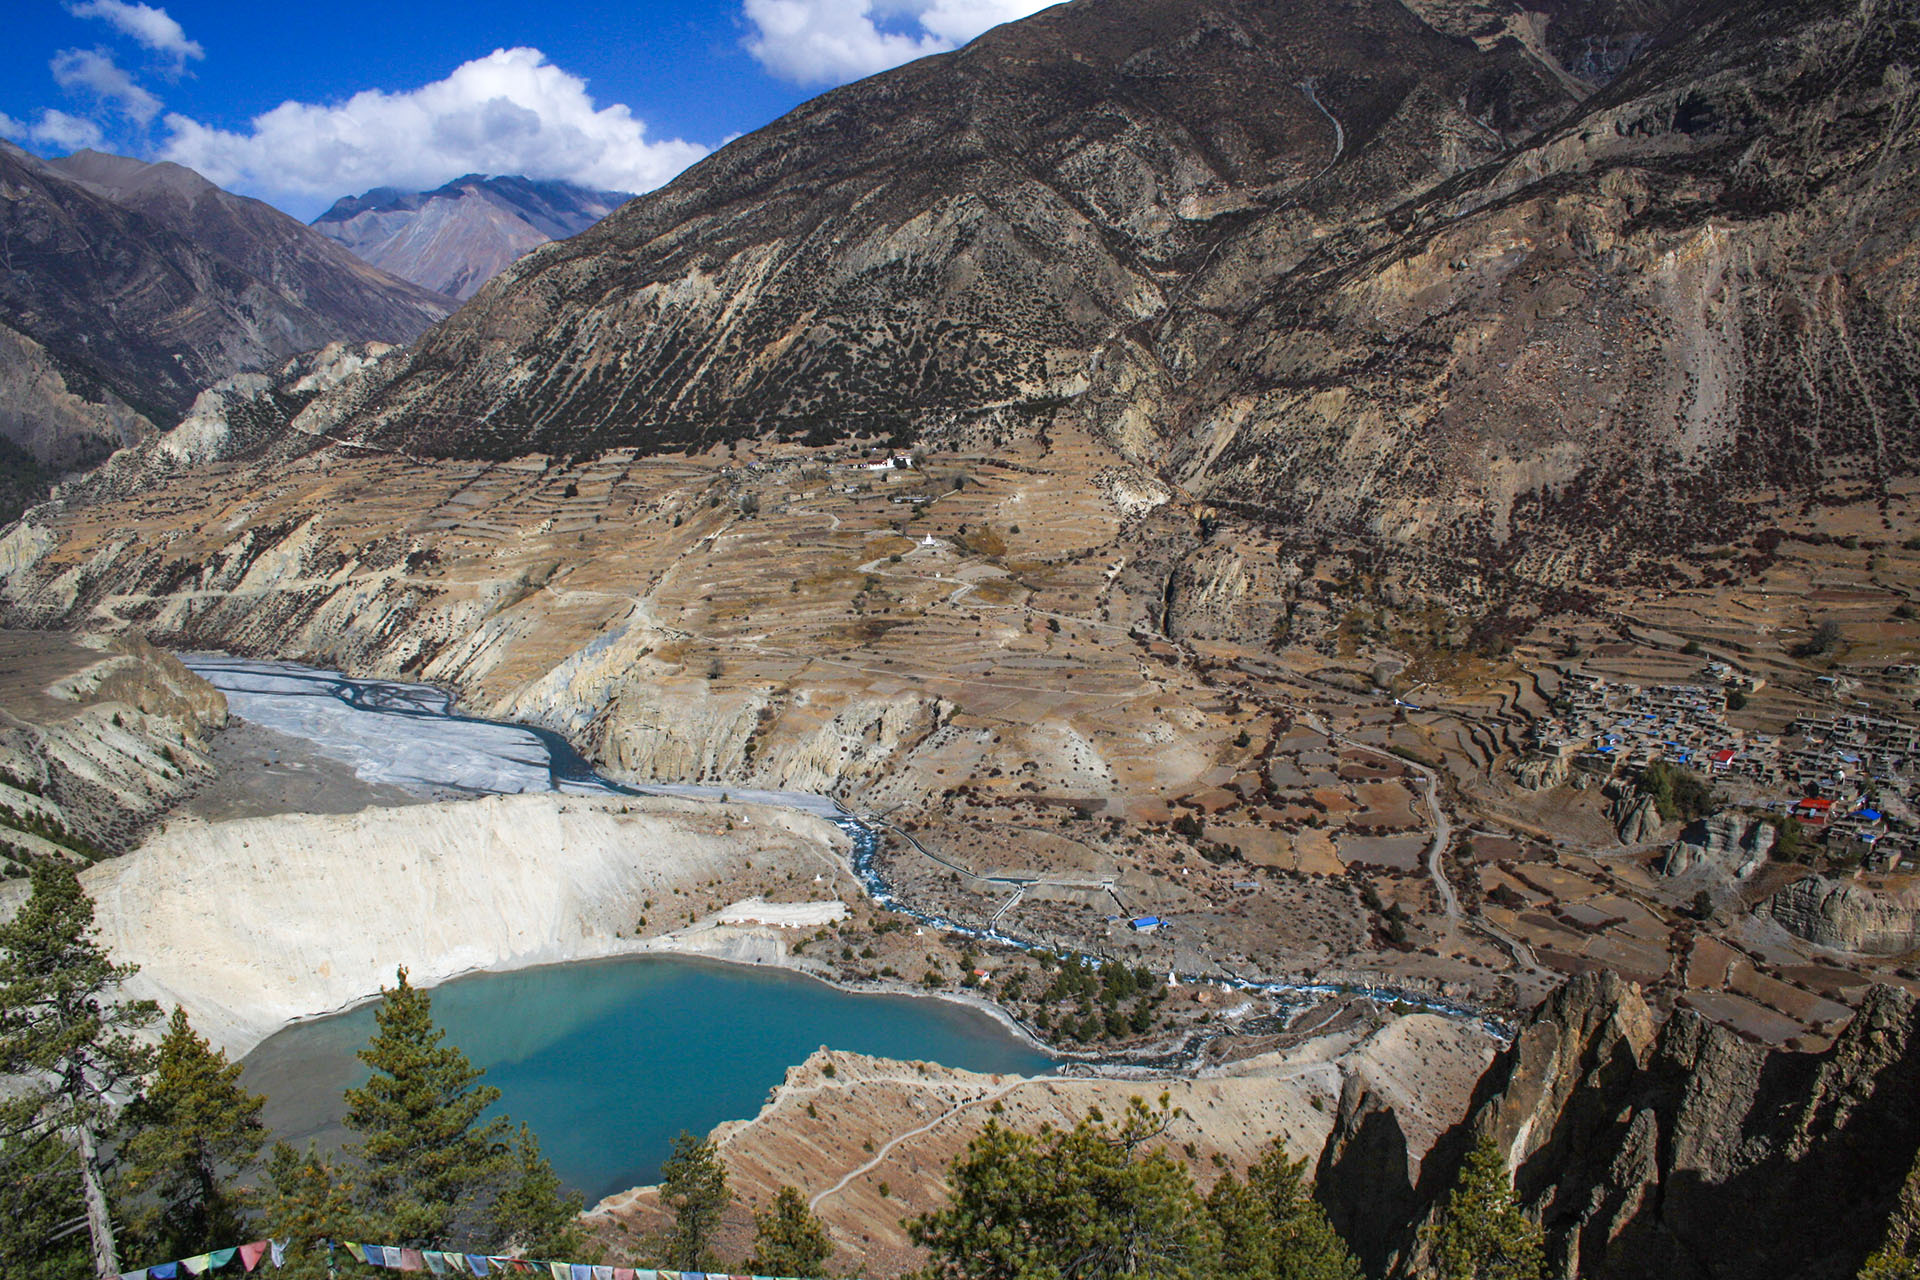 Gangapurna Lake and Manang seen from a hill opposite Manang, Nepal.